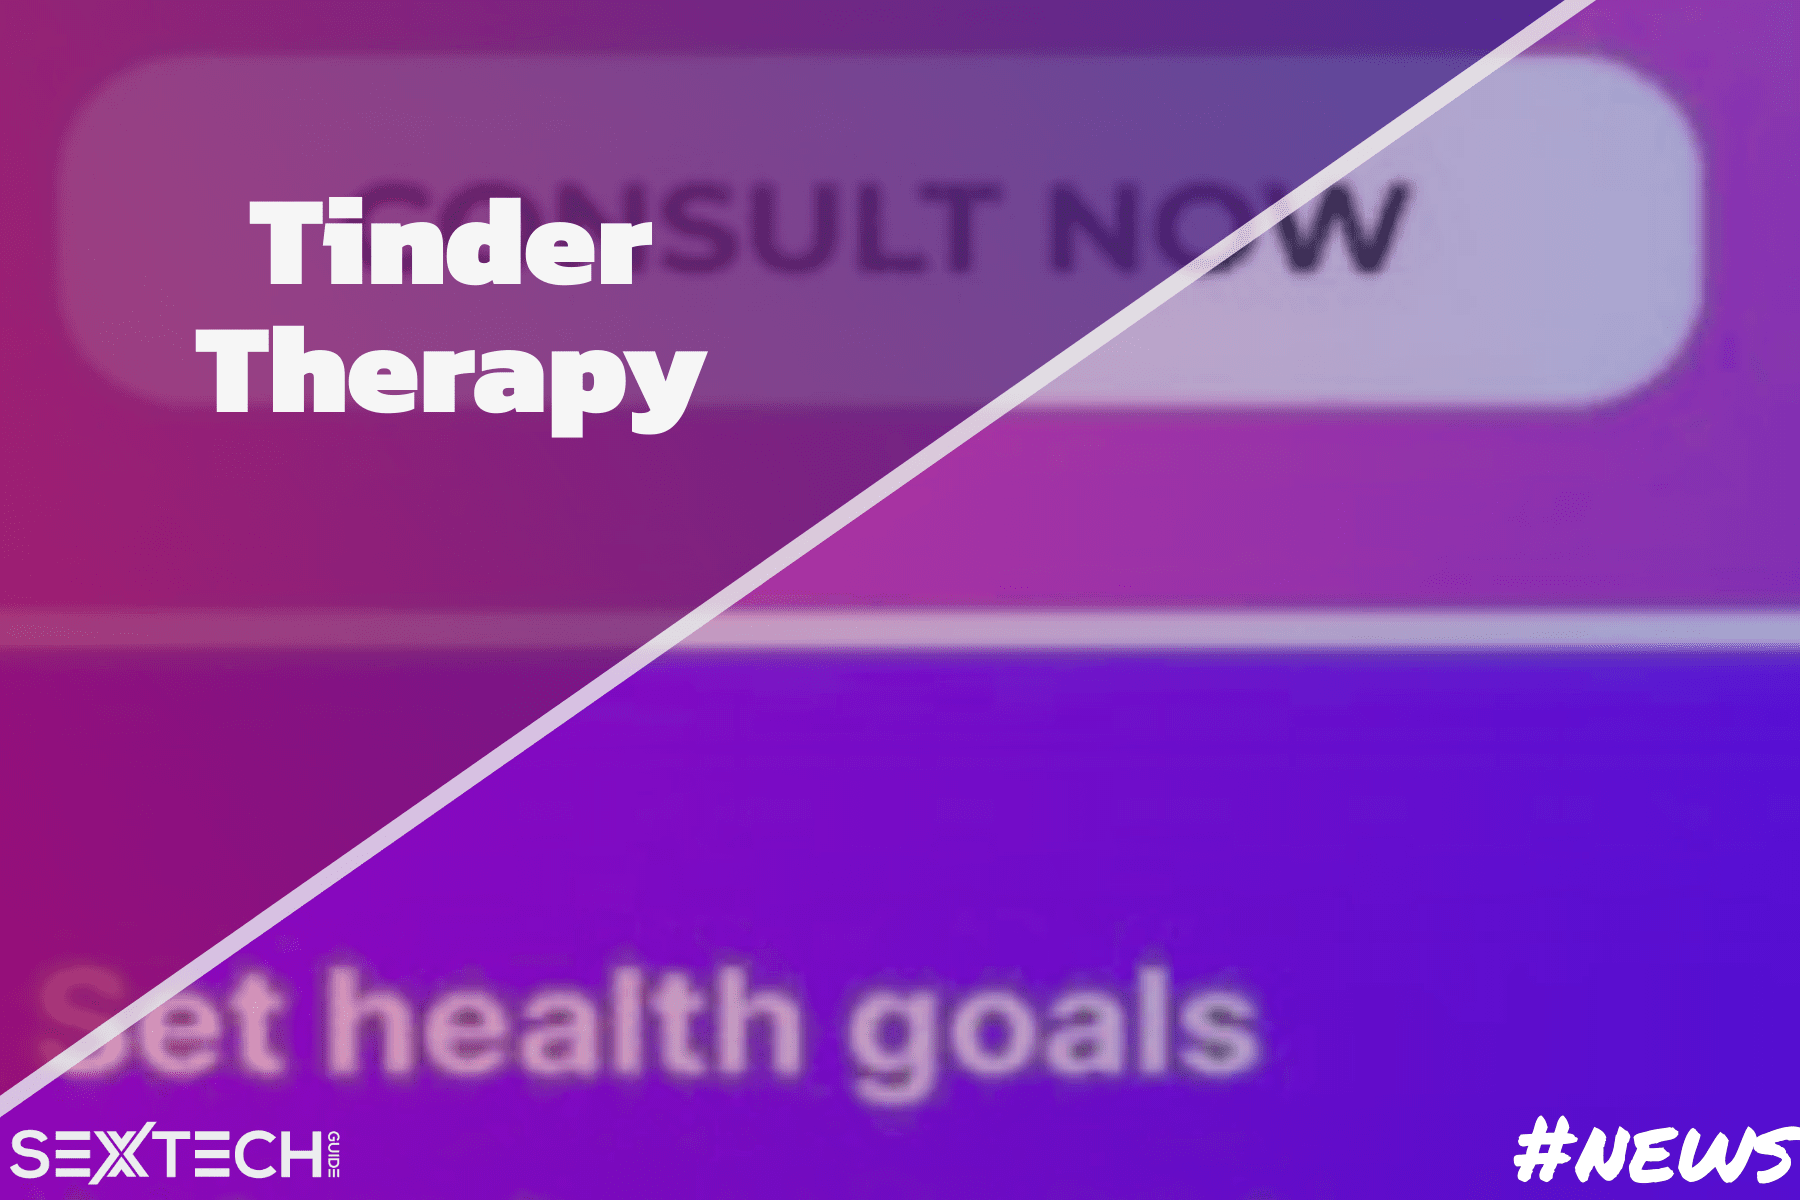 Tinder is offering users in India 2 free therapy sessions